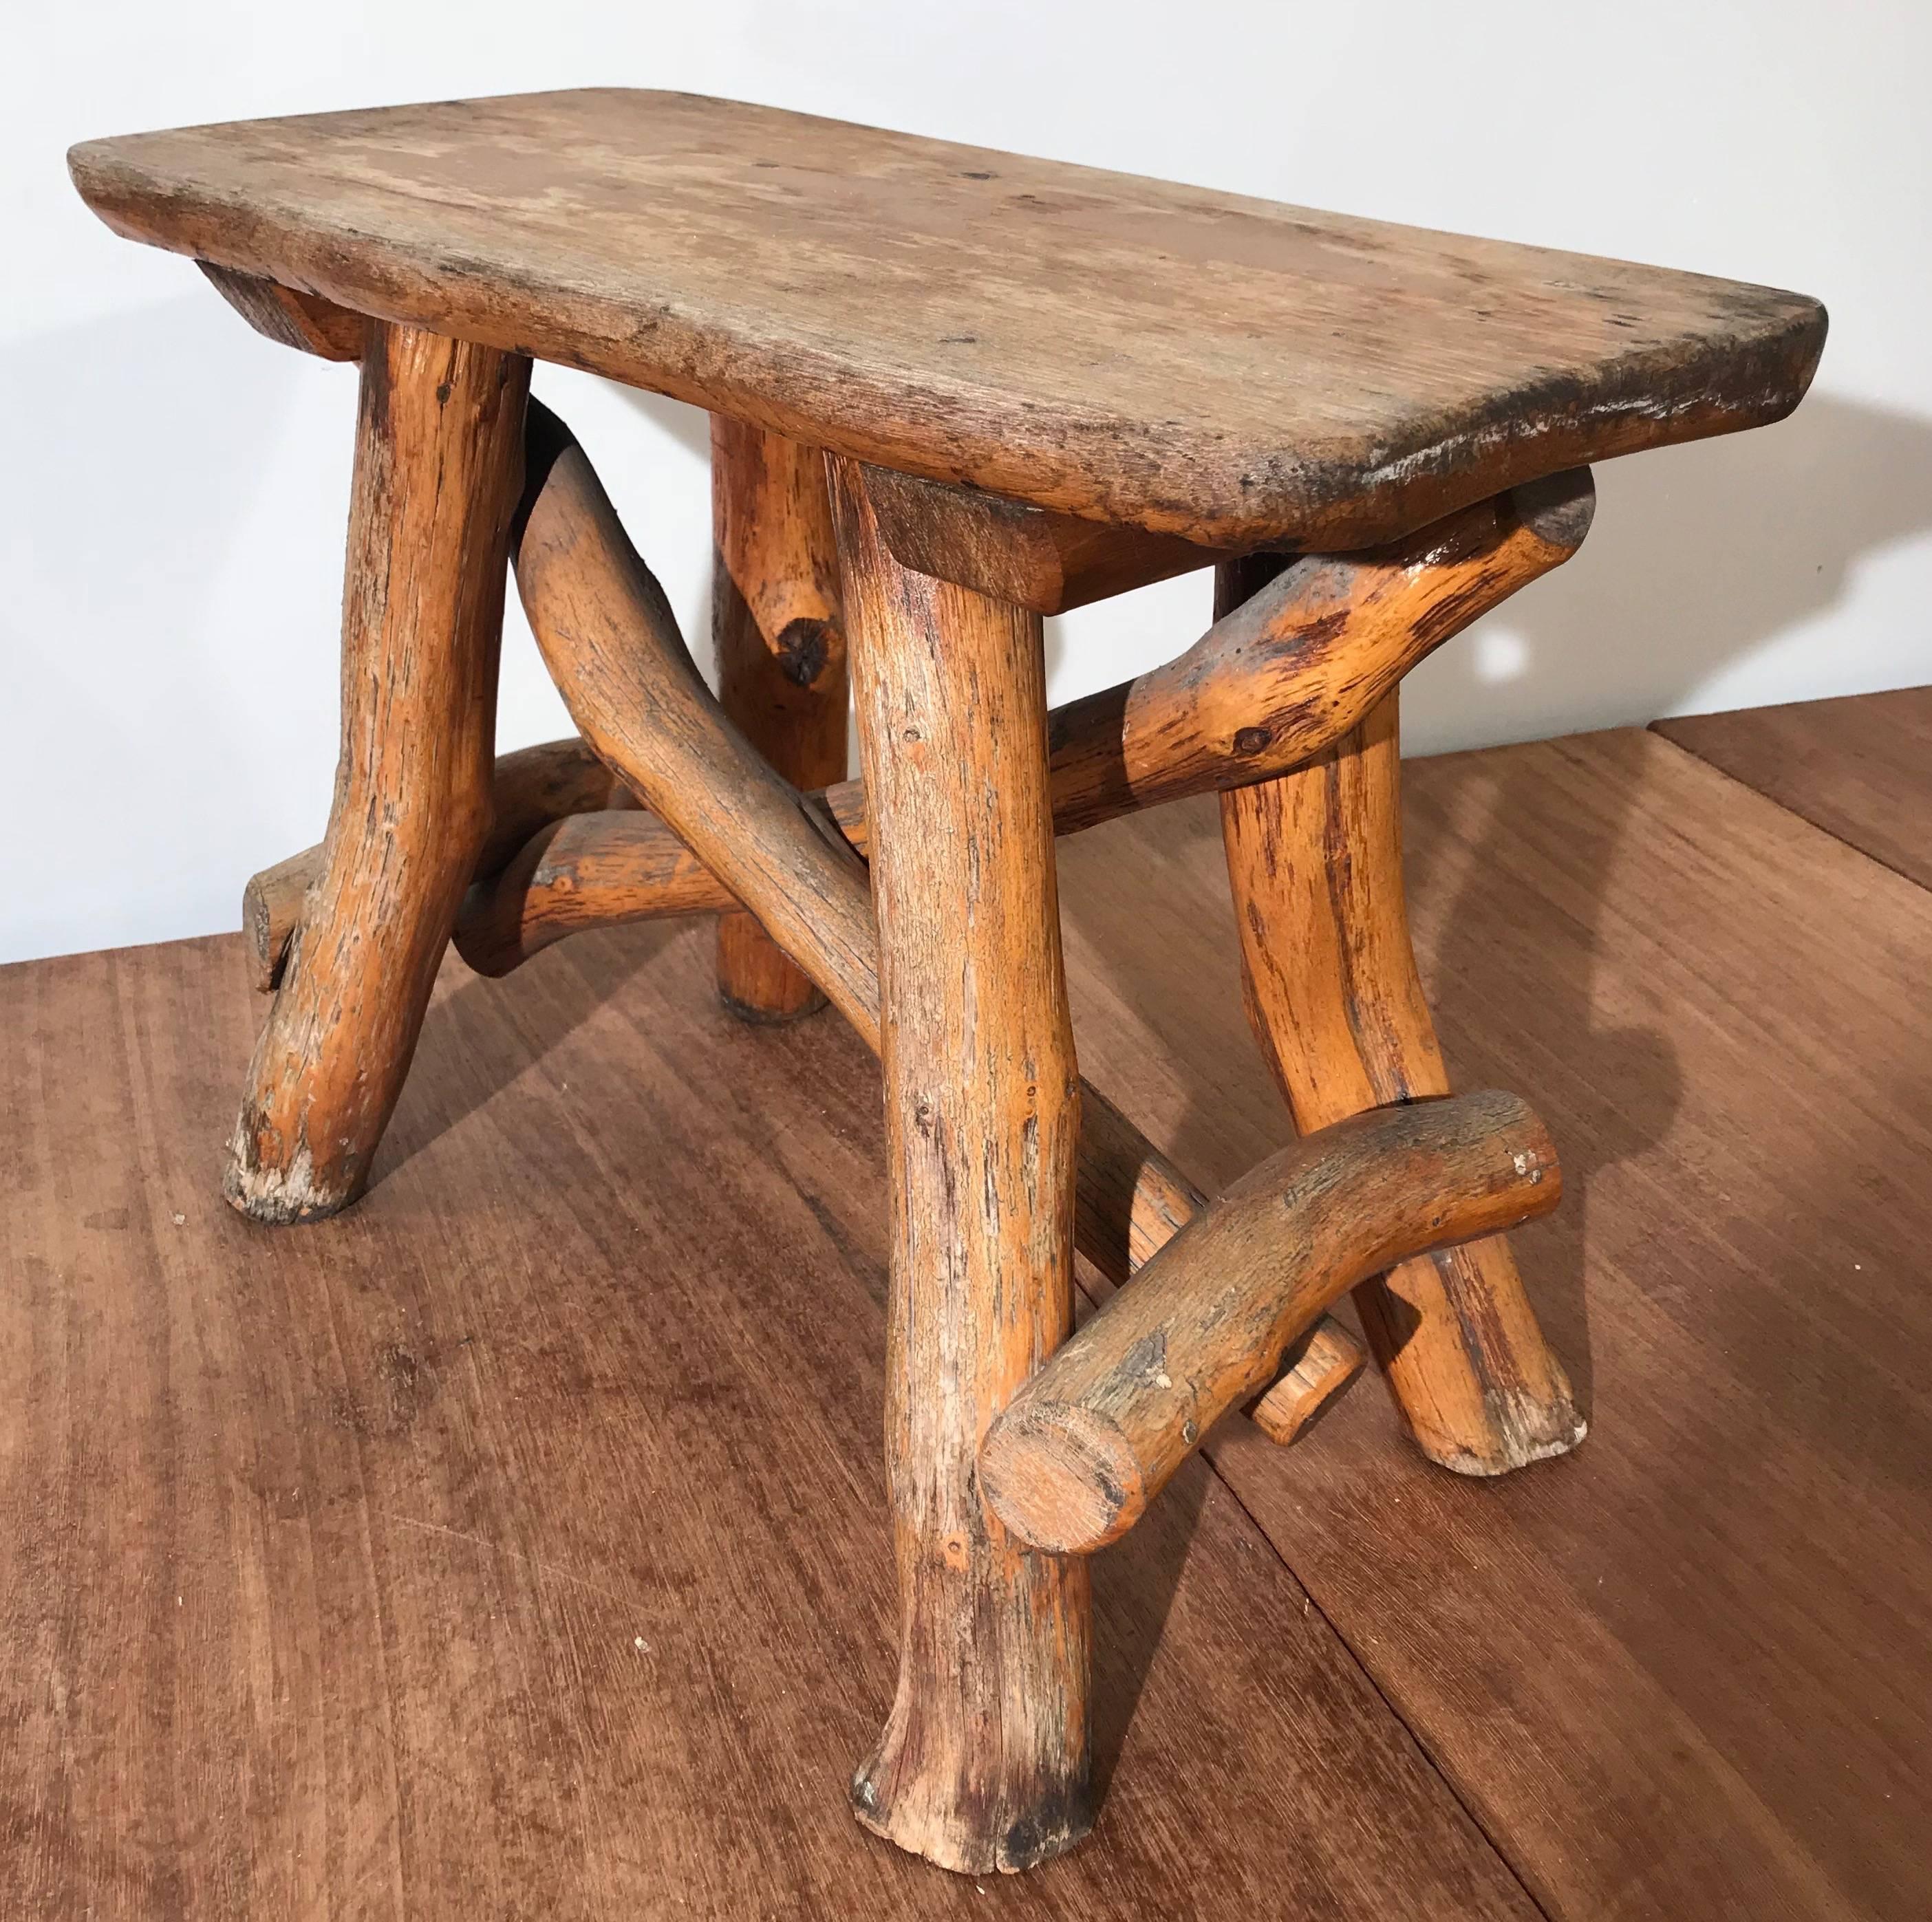 Antique Hand-Crafted Rustic and Organic Oak Tree Stool for Indoor or Outdoor For Sale 5